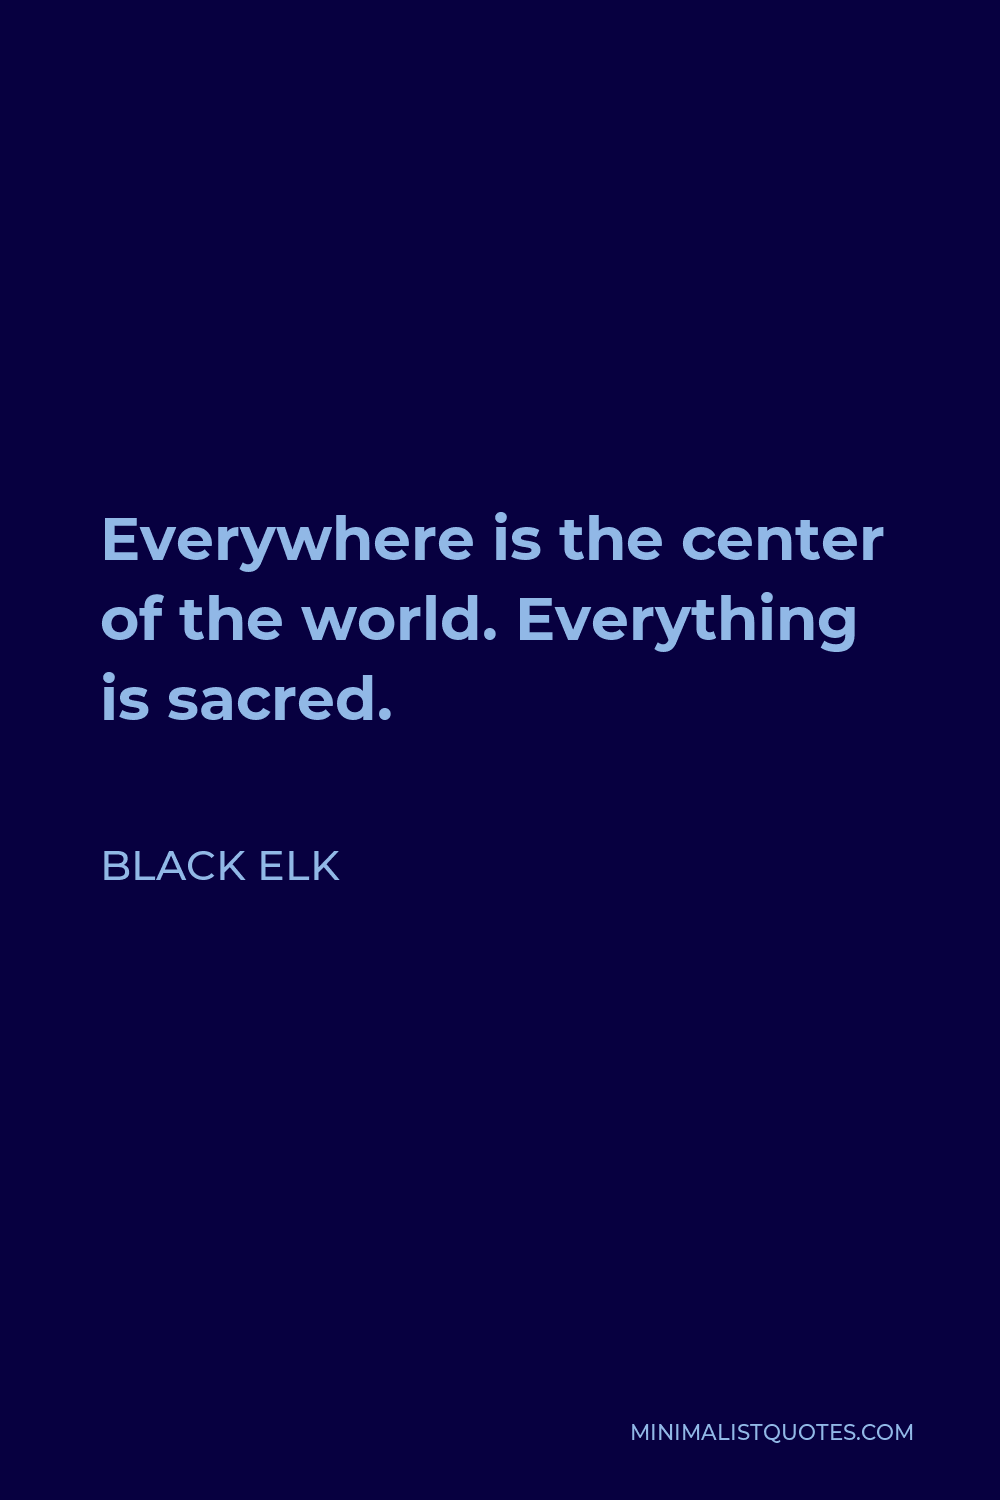 Black Elk Quote - Everywhere is the center of the world. Everything is sacred.